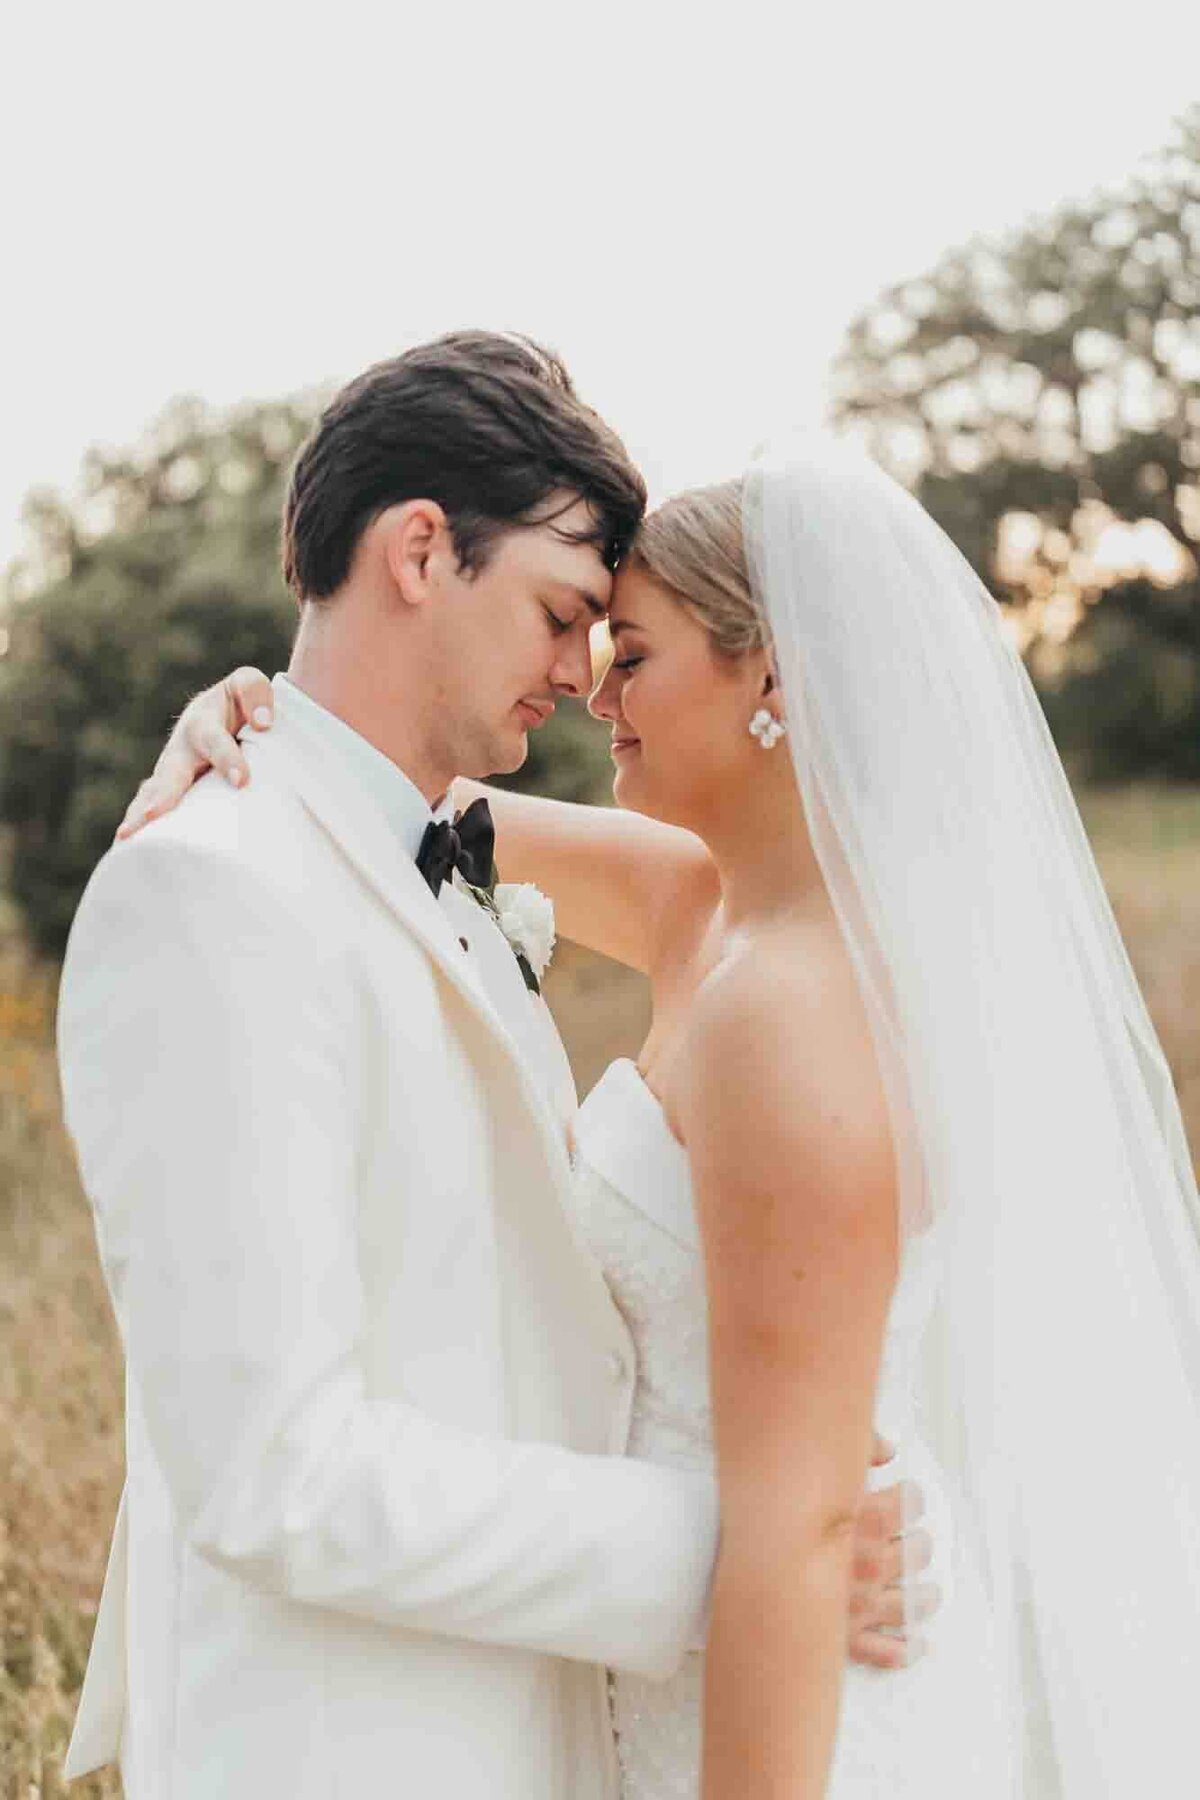 bride and groom touch foreheads during intimate moment together after getting married.